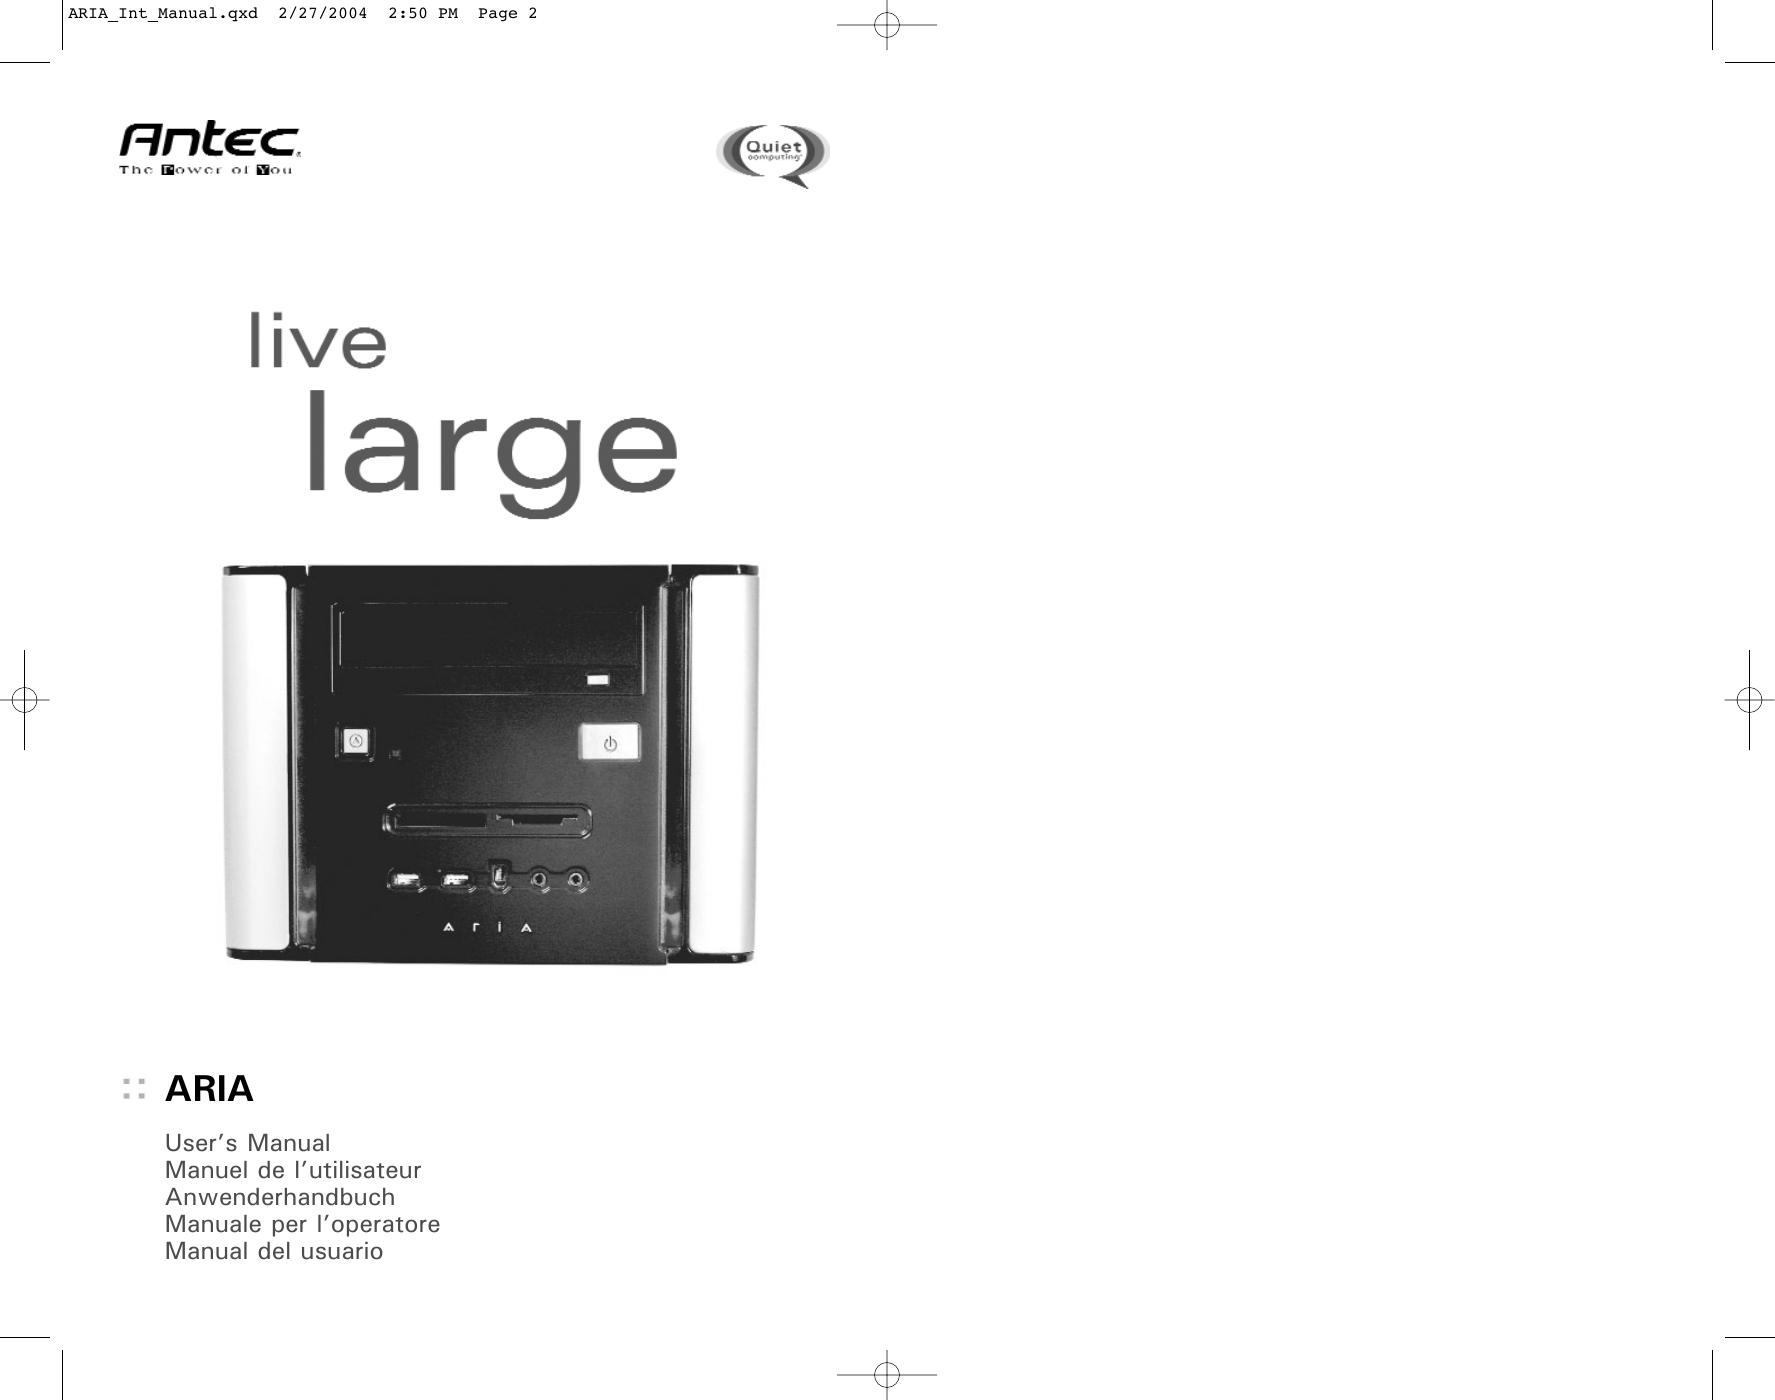 Page 1 of 4 - Antec Antec-Ar300-Users-Manual- ARIA_Int_Manual  Antec-ar300-users-manual